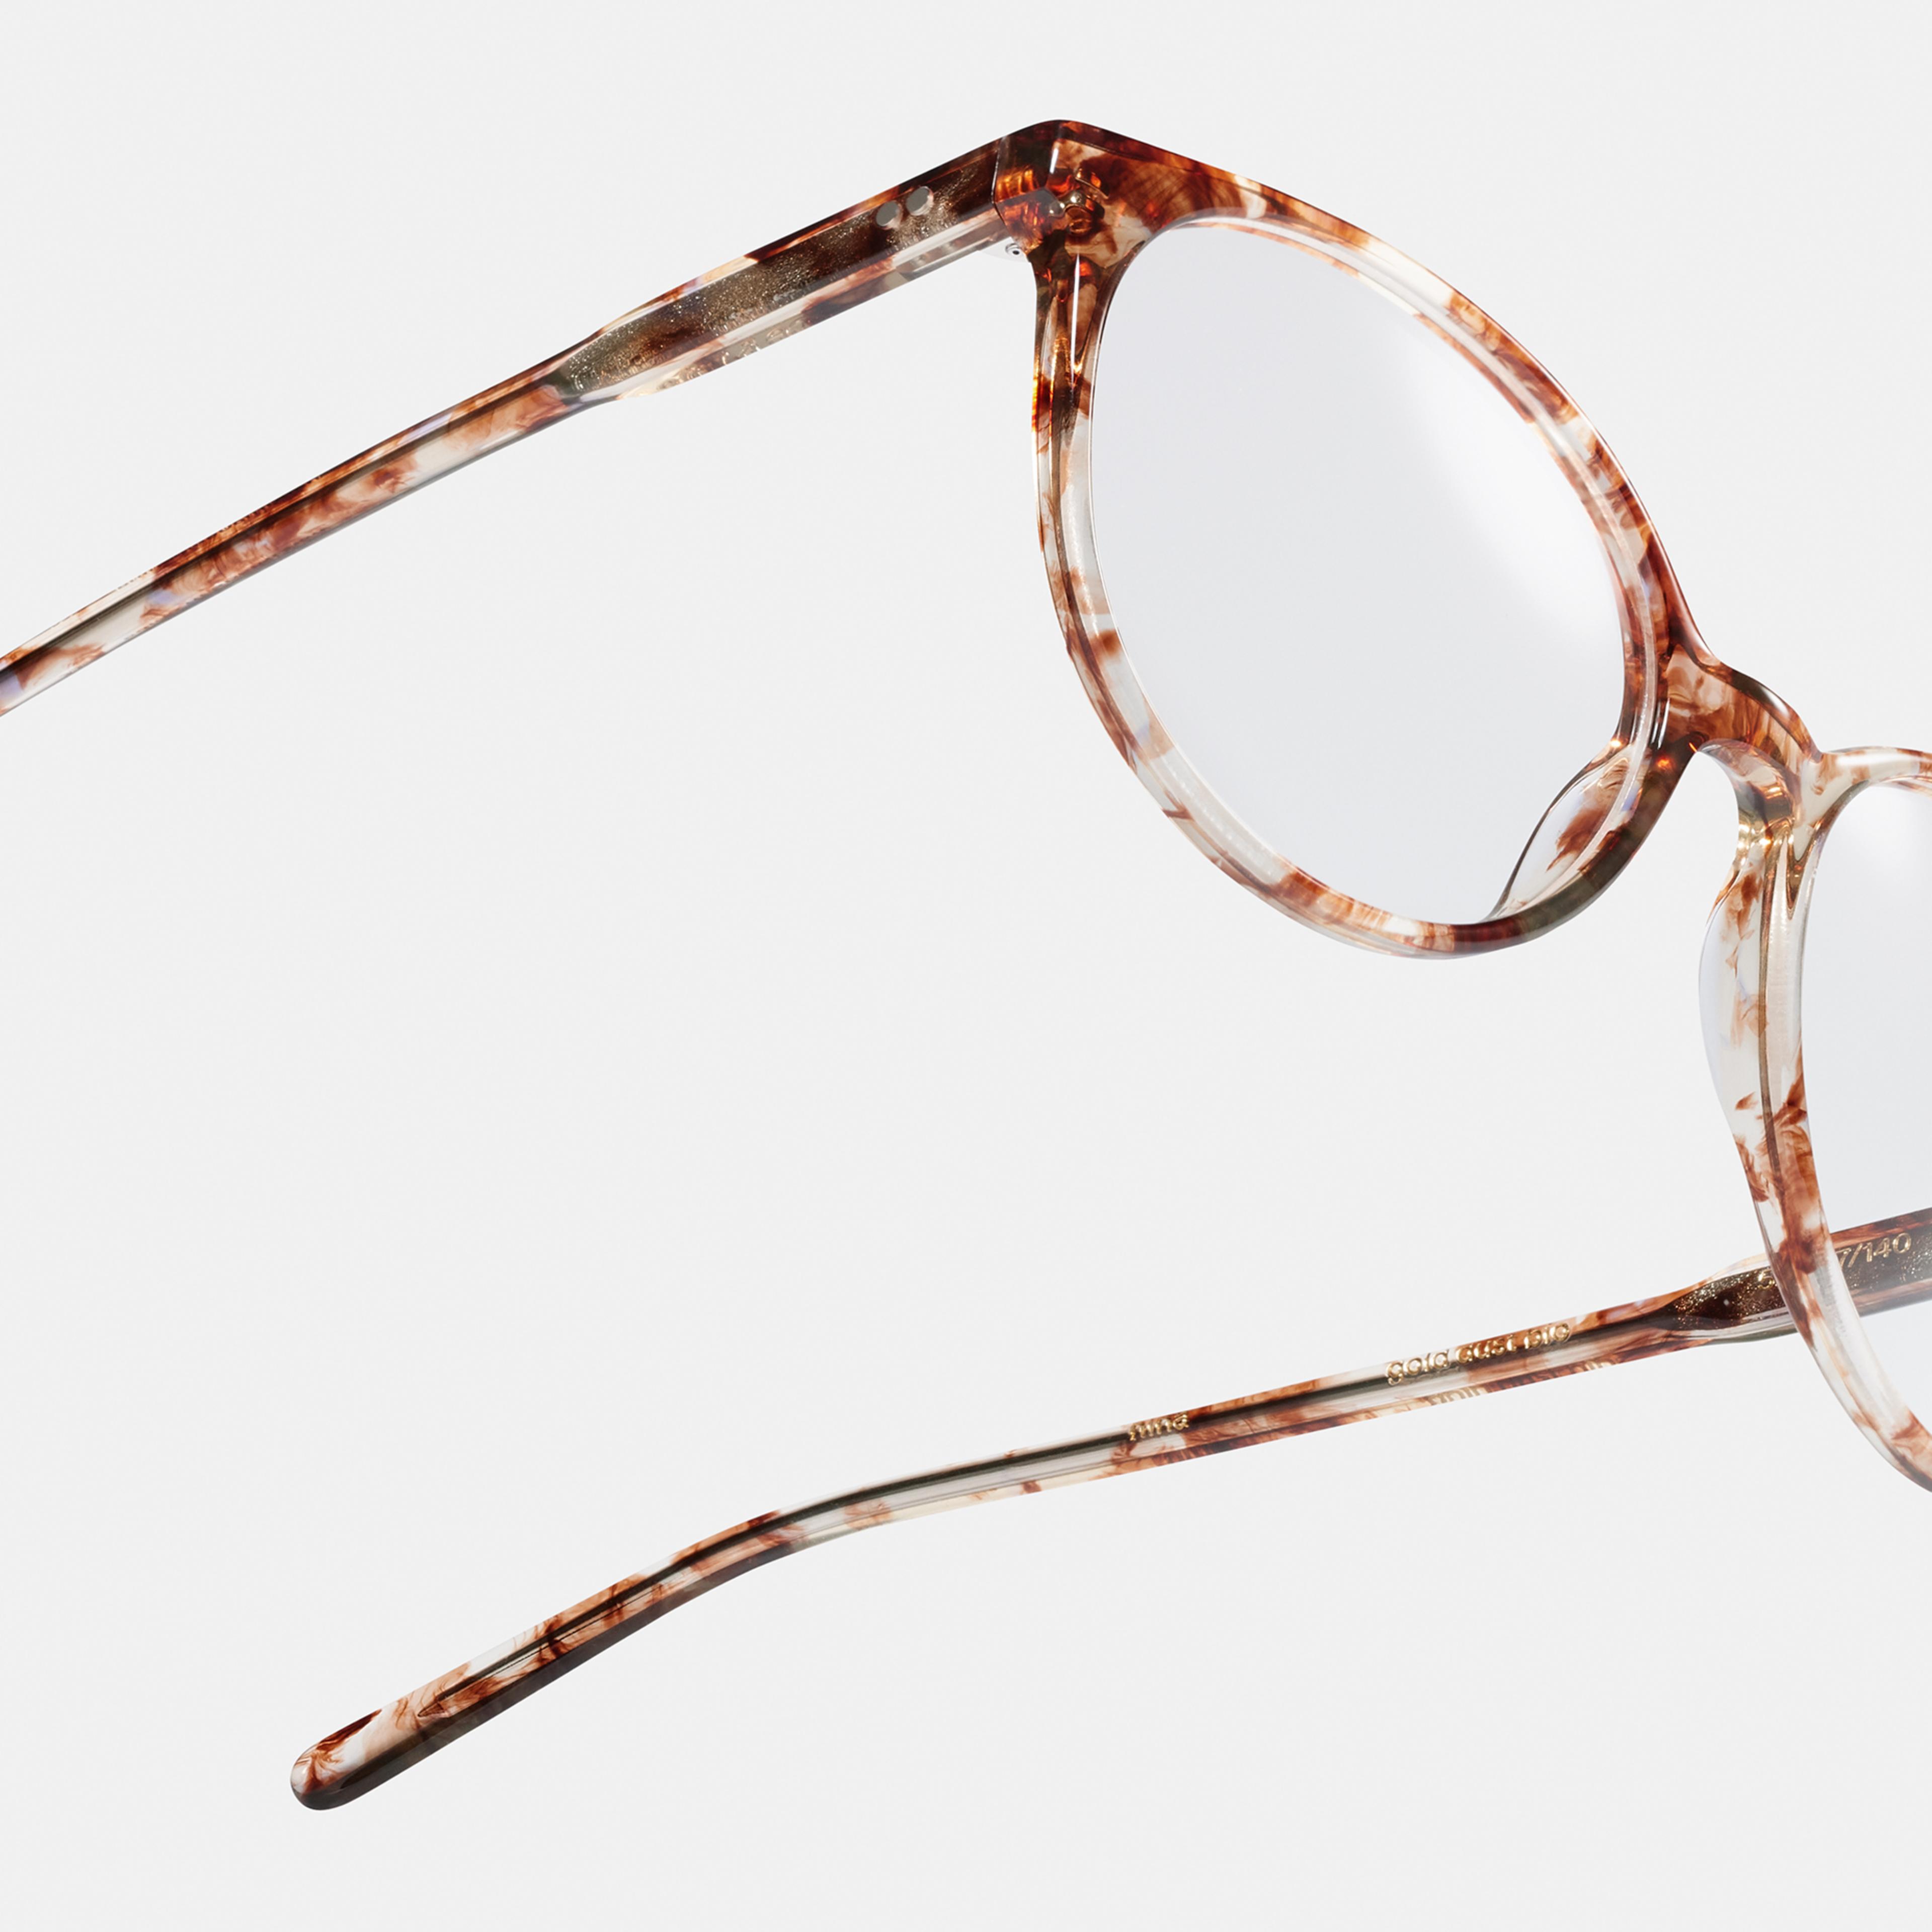 Ace & Tate Glasses | oval Acetate in Brown, Clear